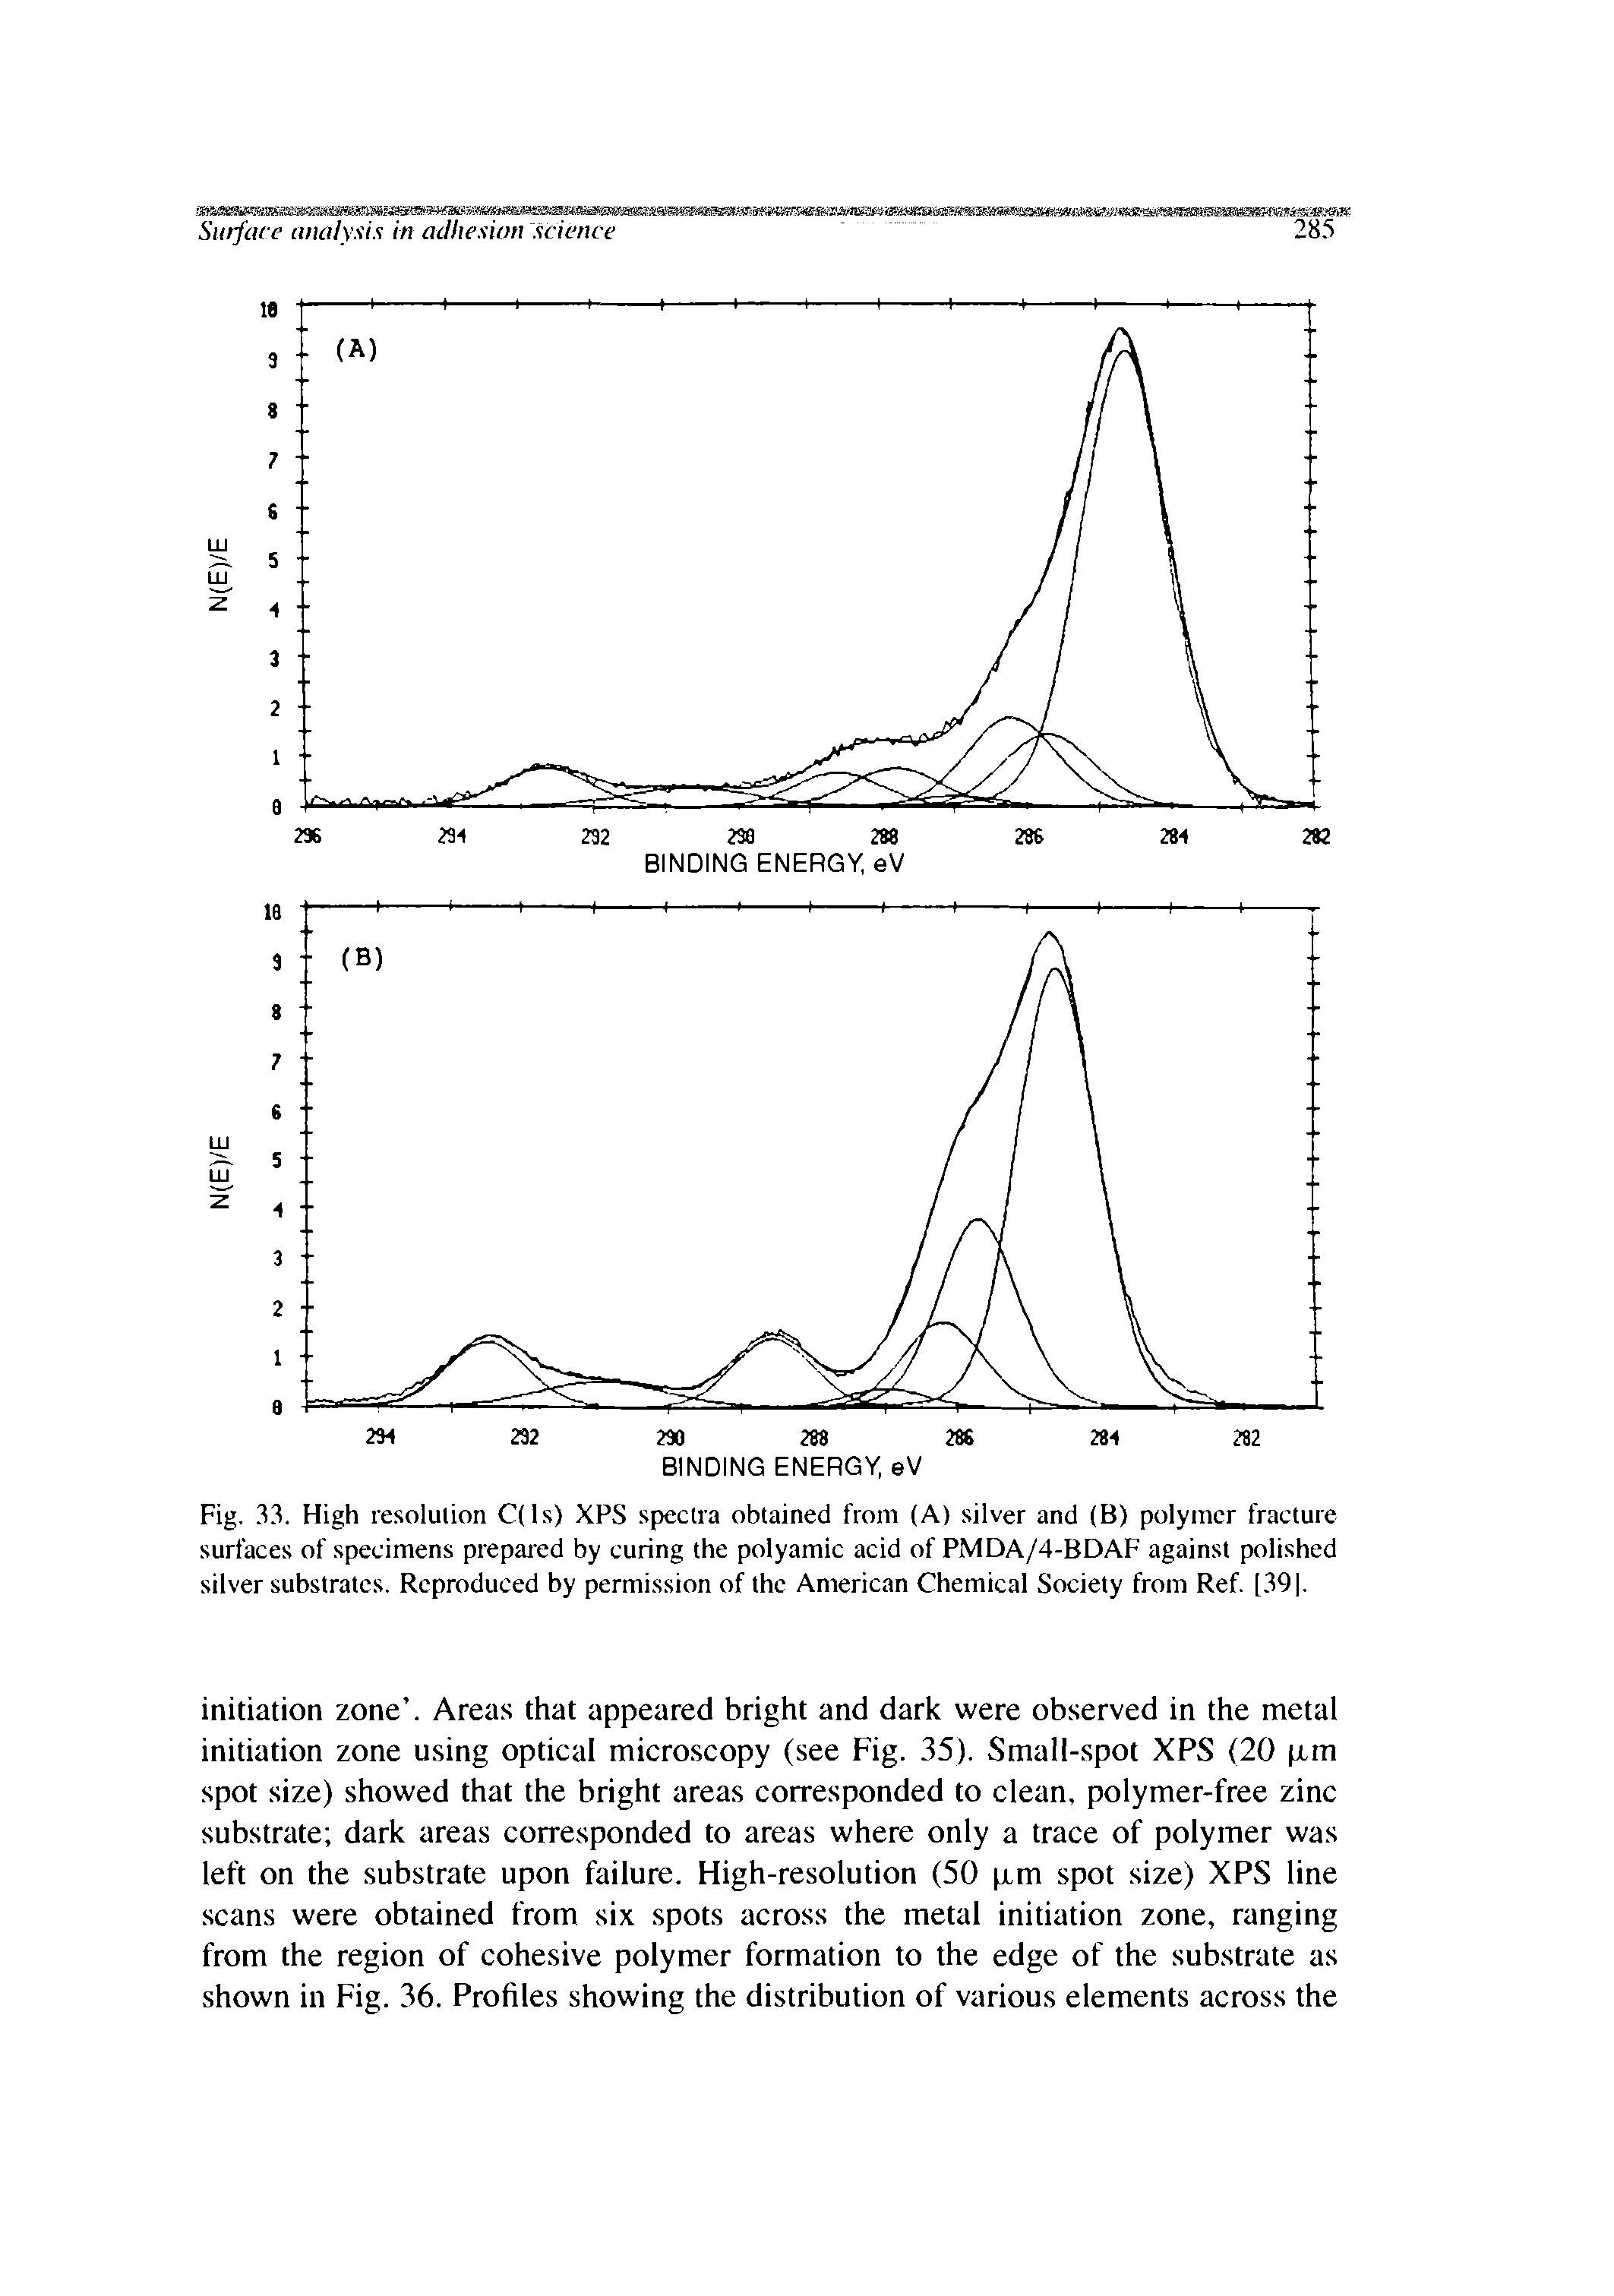 Fig. 33. High resolution C(ls) XPS spectra obtained from (A) silver and (B) polymer fracture surfaces of specimens prepared by curing the polyamic acid of PMDA/4-BDAF against polished silver substrates. Reproduced hy permission of the American Chemical Society from Ref. [391.